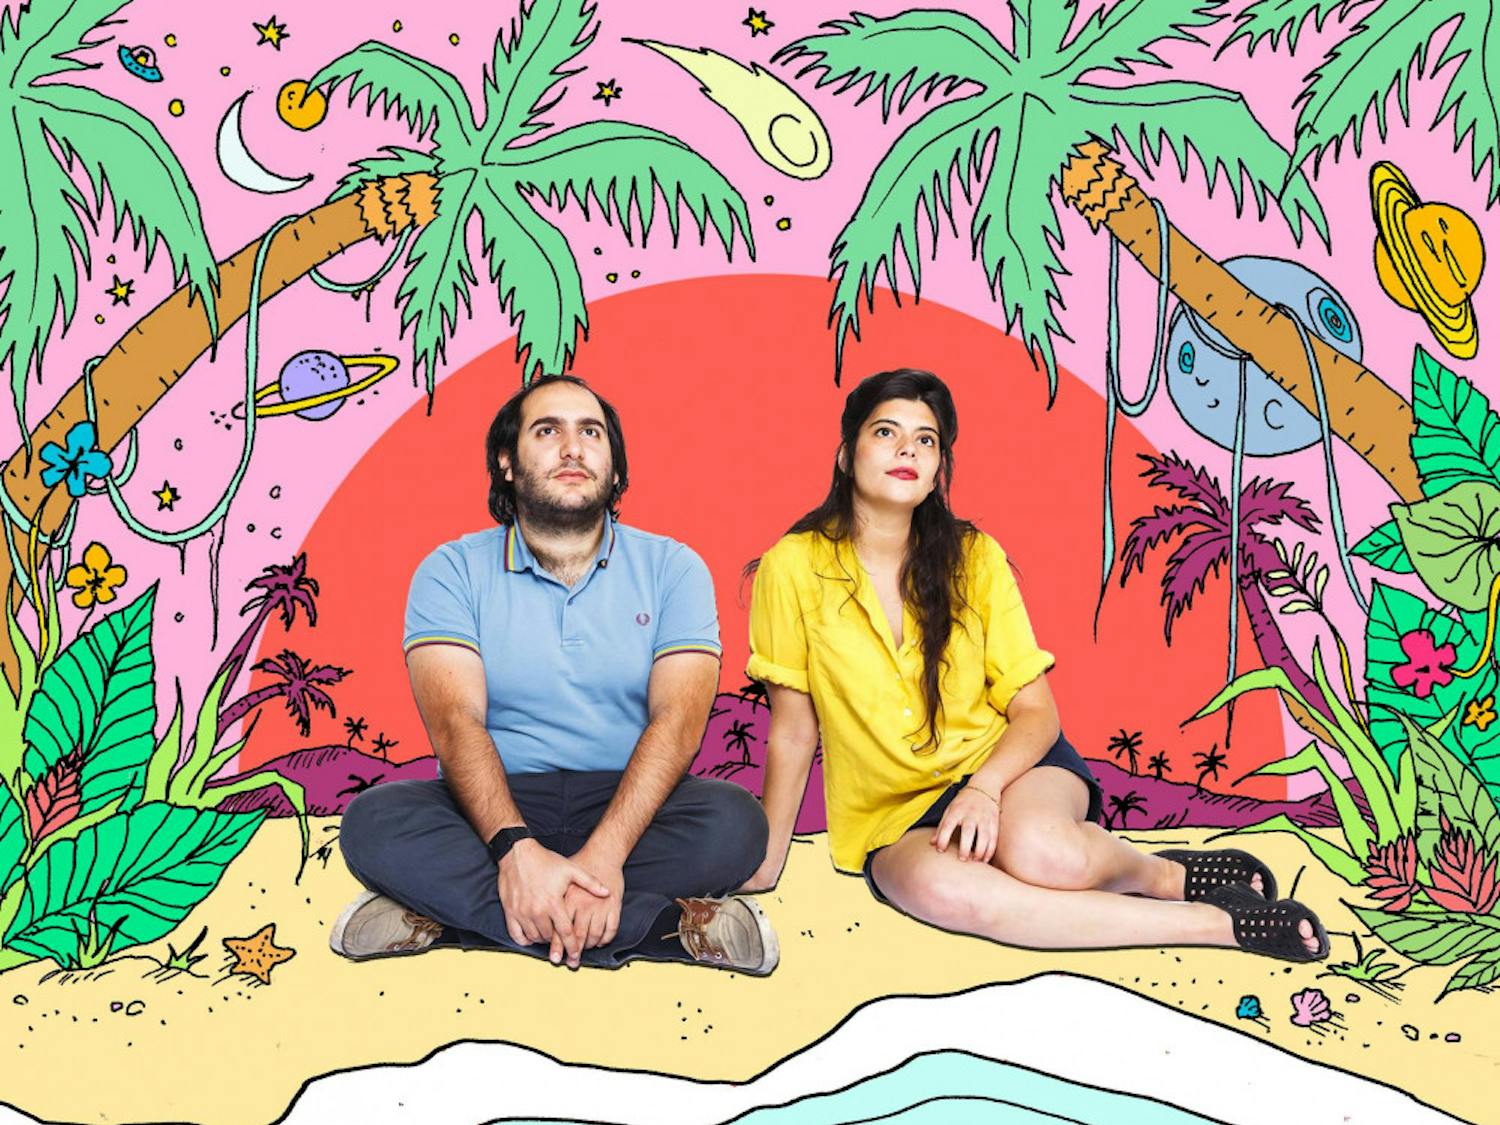 Pearl &amp; The Oysters are leaving behind the Florida swamps for Los Angeles, where the Paris-born duo plans to pursue more musical opportunities for the band.